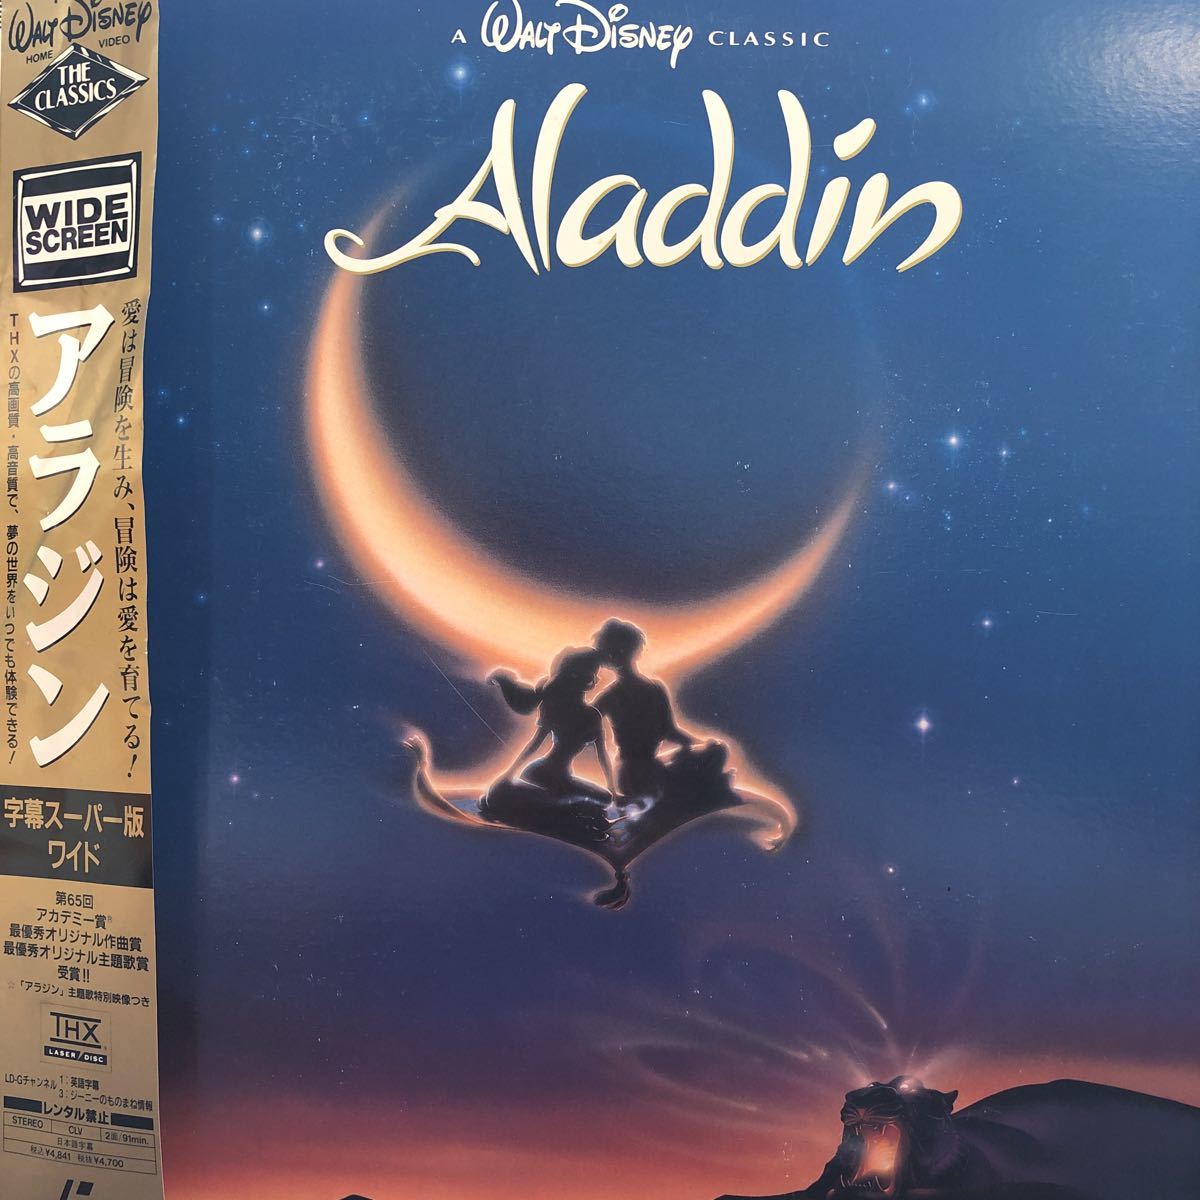 d with belt LD Disney Aladdin title super version wide 5 point and more successful bid free shipping laser disk 